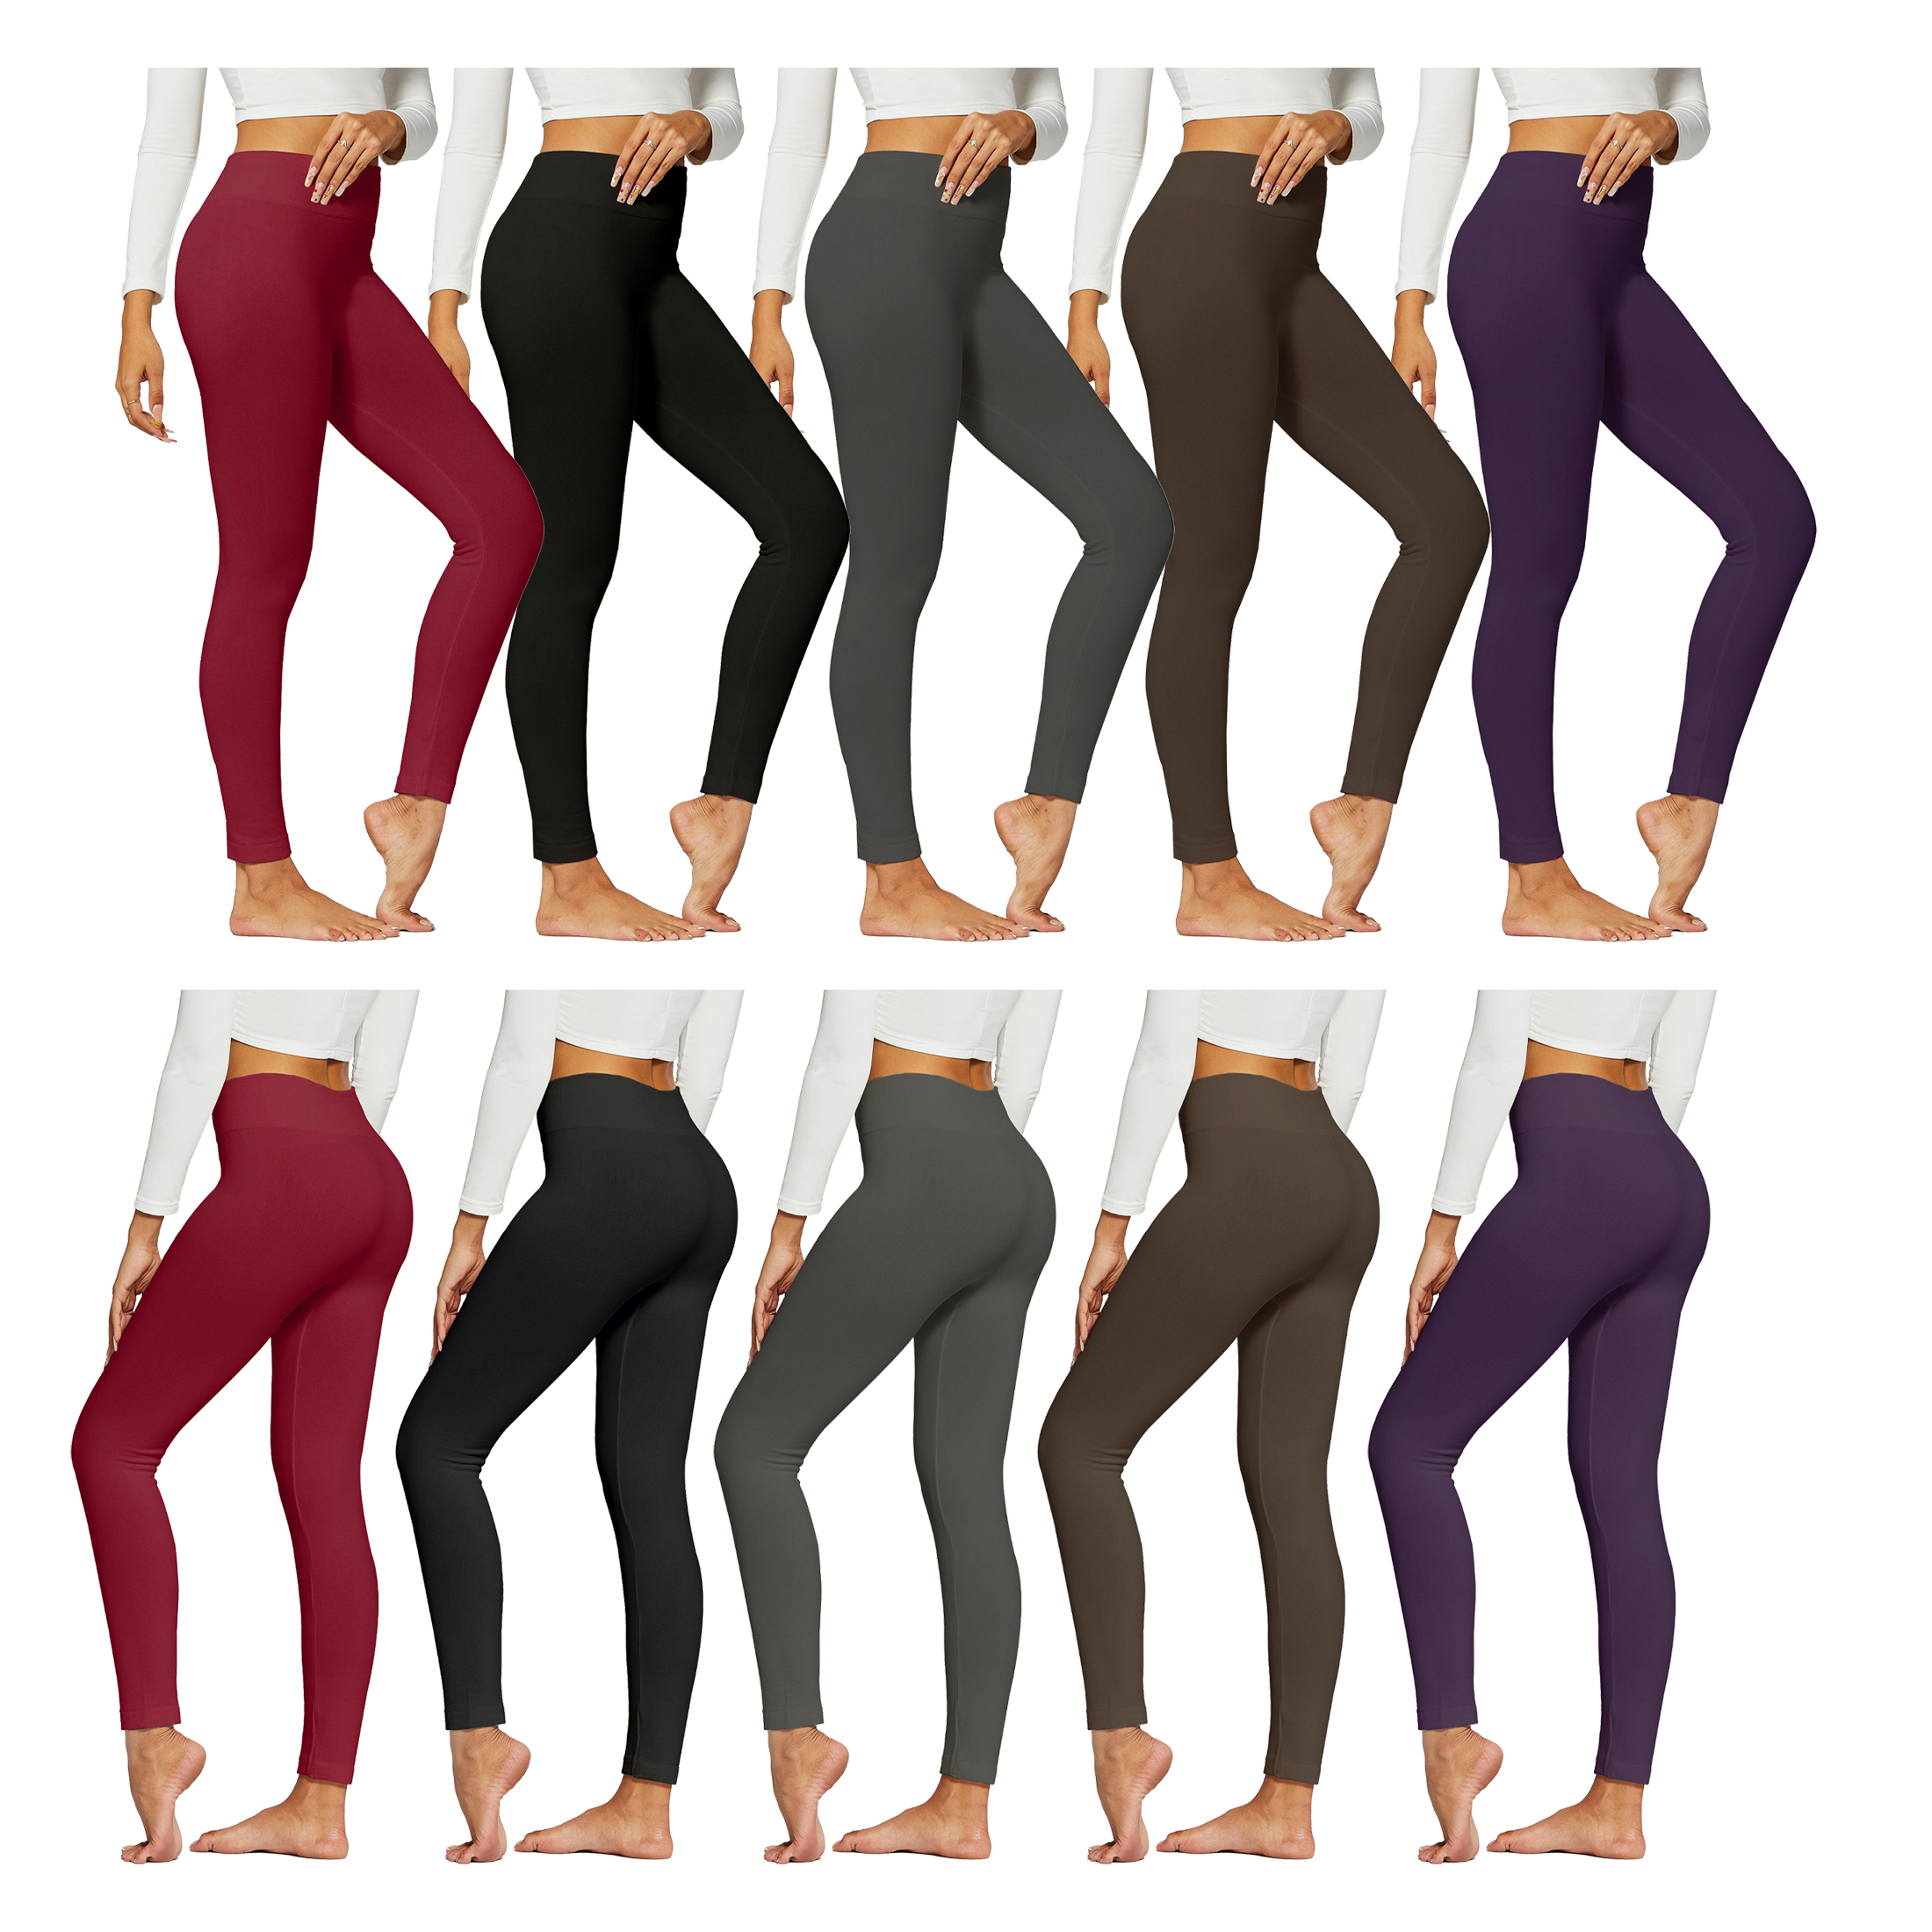 3-Pack:Women's Premium Quality High-Waist Fleece-Lined Leggings (Plus Size Available) - Black, Red & Brown, 1X/2X